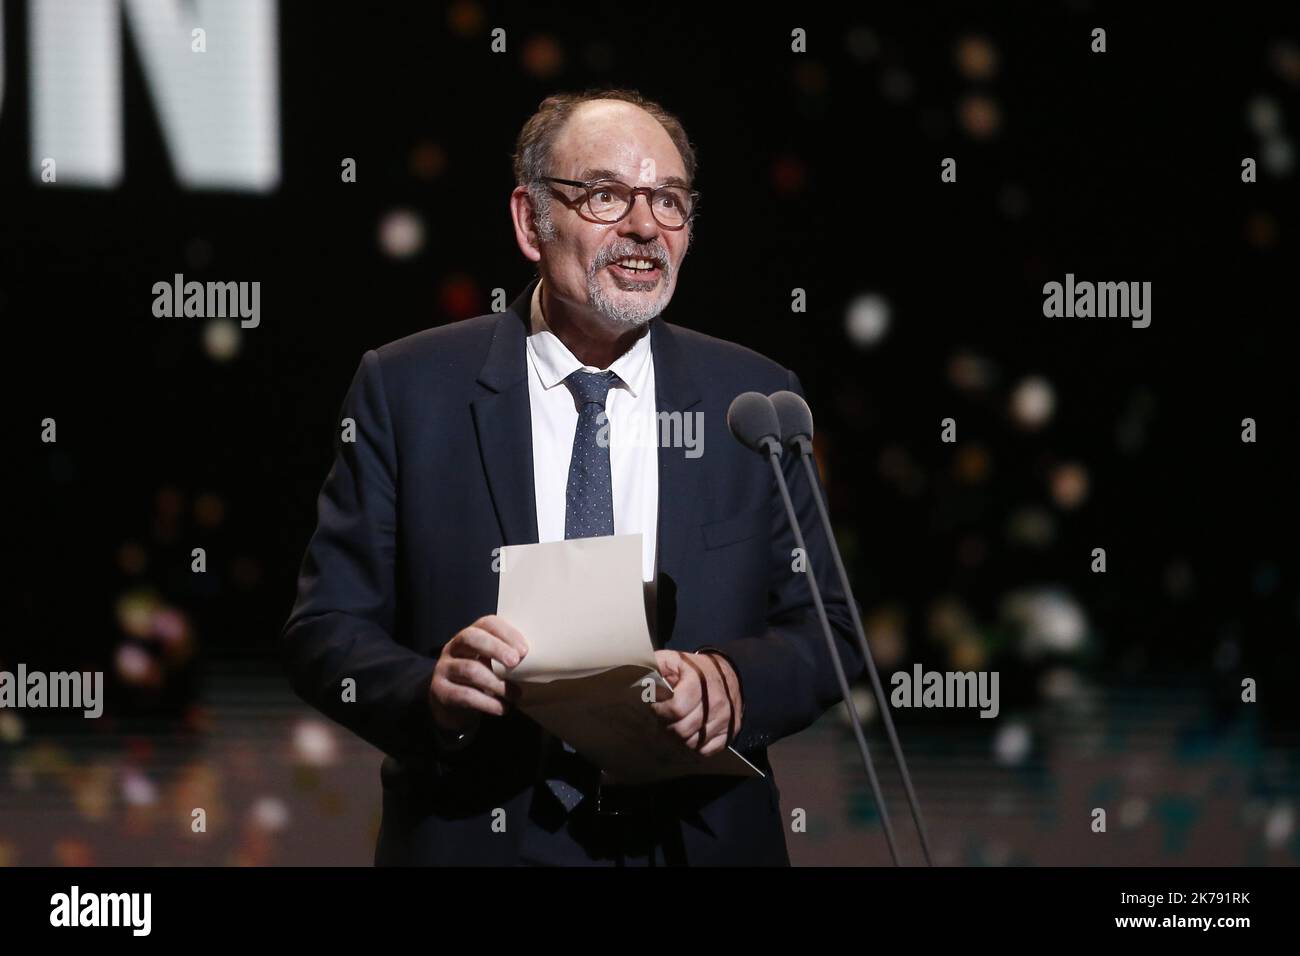 Jean-Pierre Darroussin on stage during the Cesar Film Awards 2020 Ceremony At Salle Pleyel In Paris in Paris, France.  Stock Photo